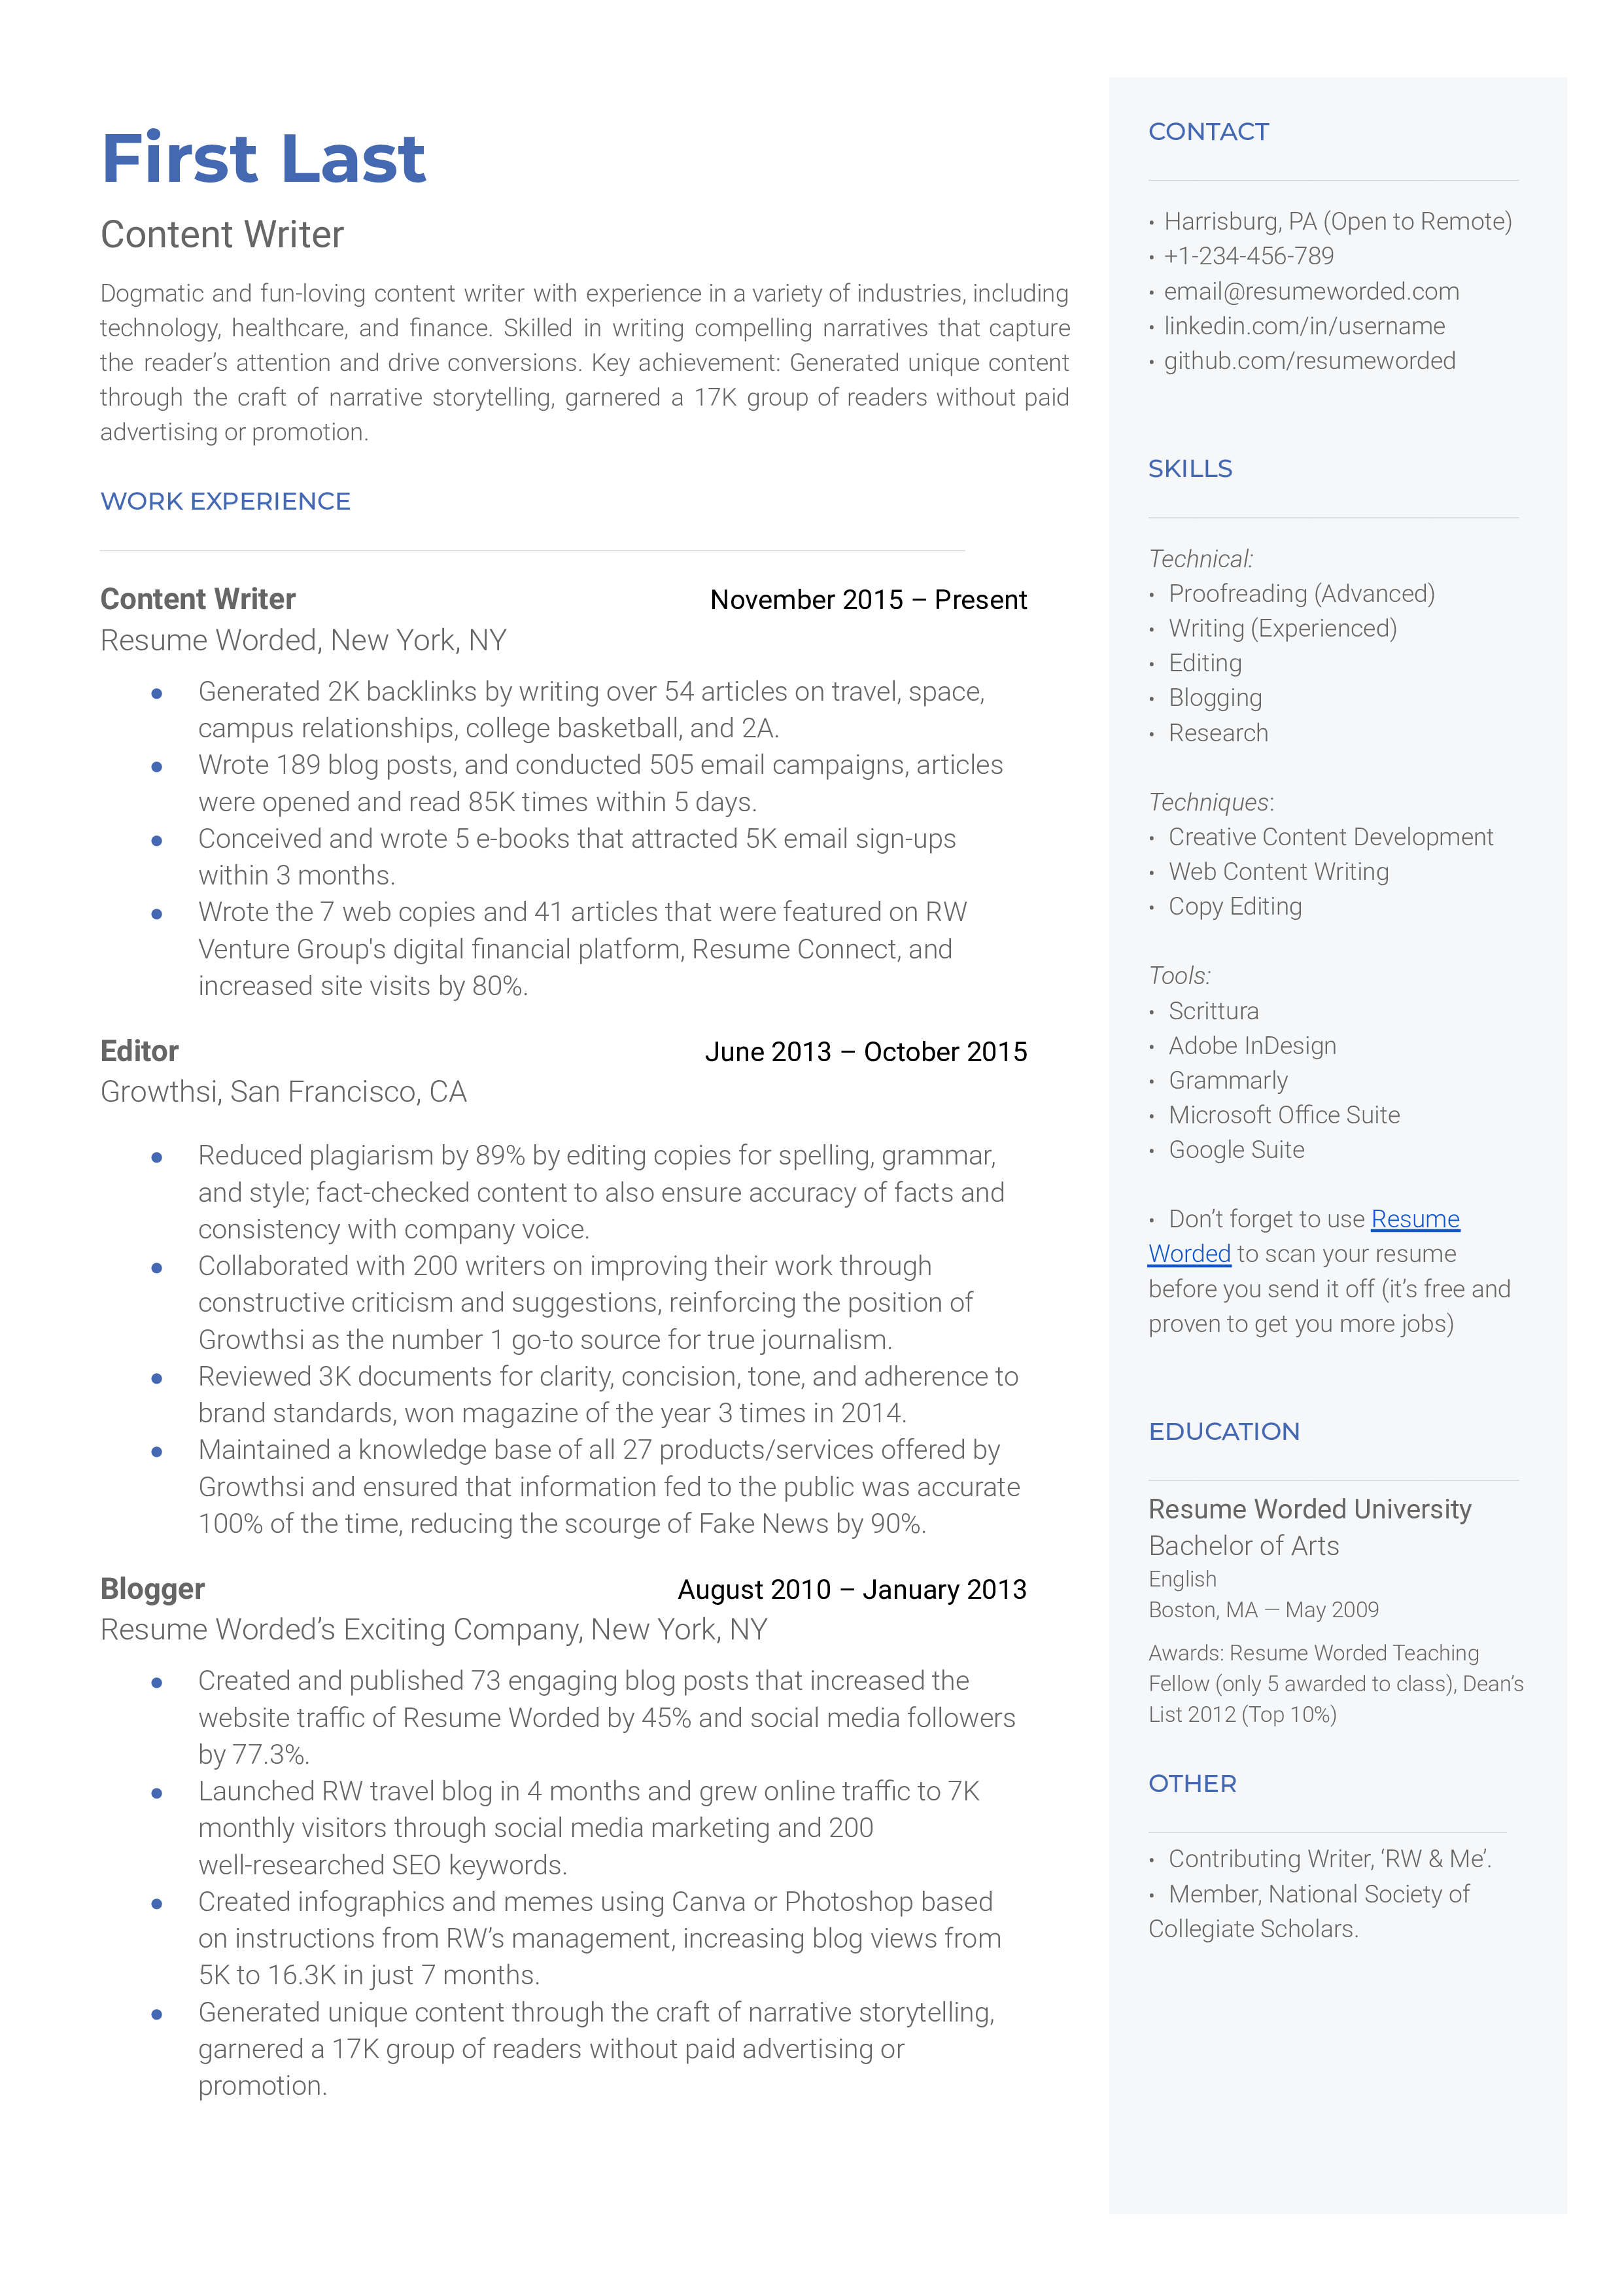 A content writer resume sample that highlights the applicant’s variety in experience and strong educational background.